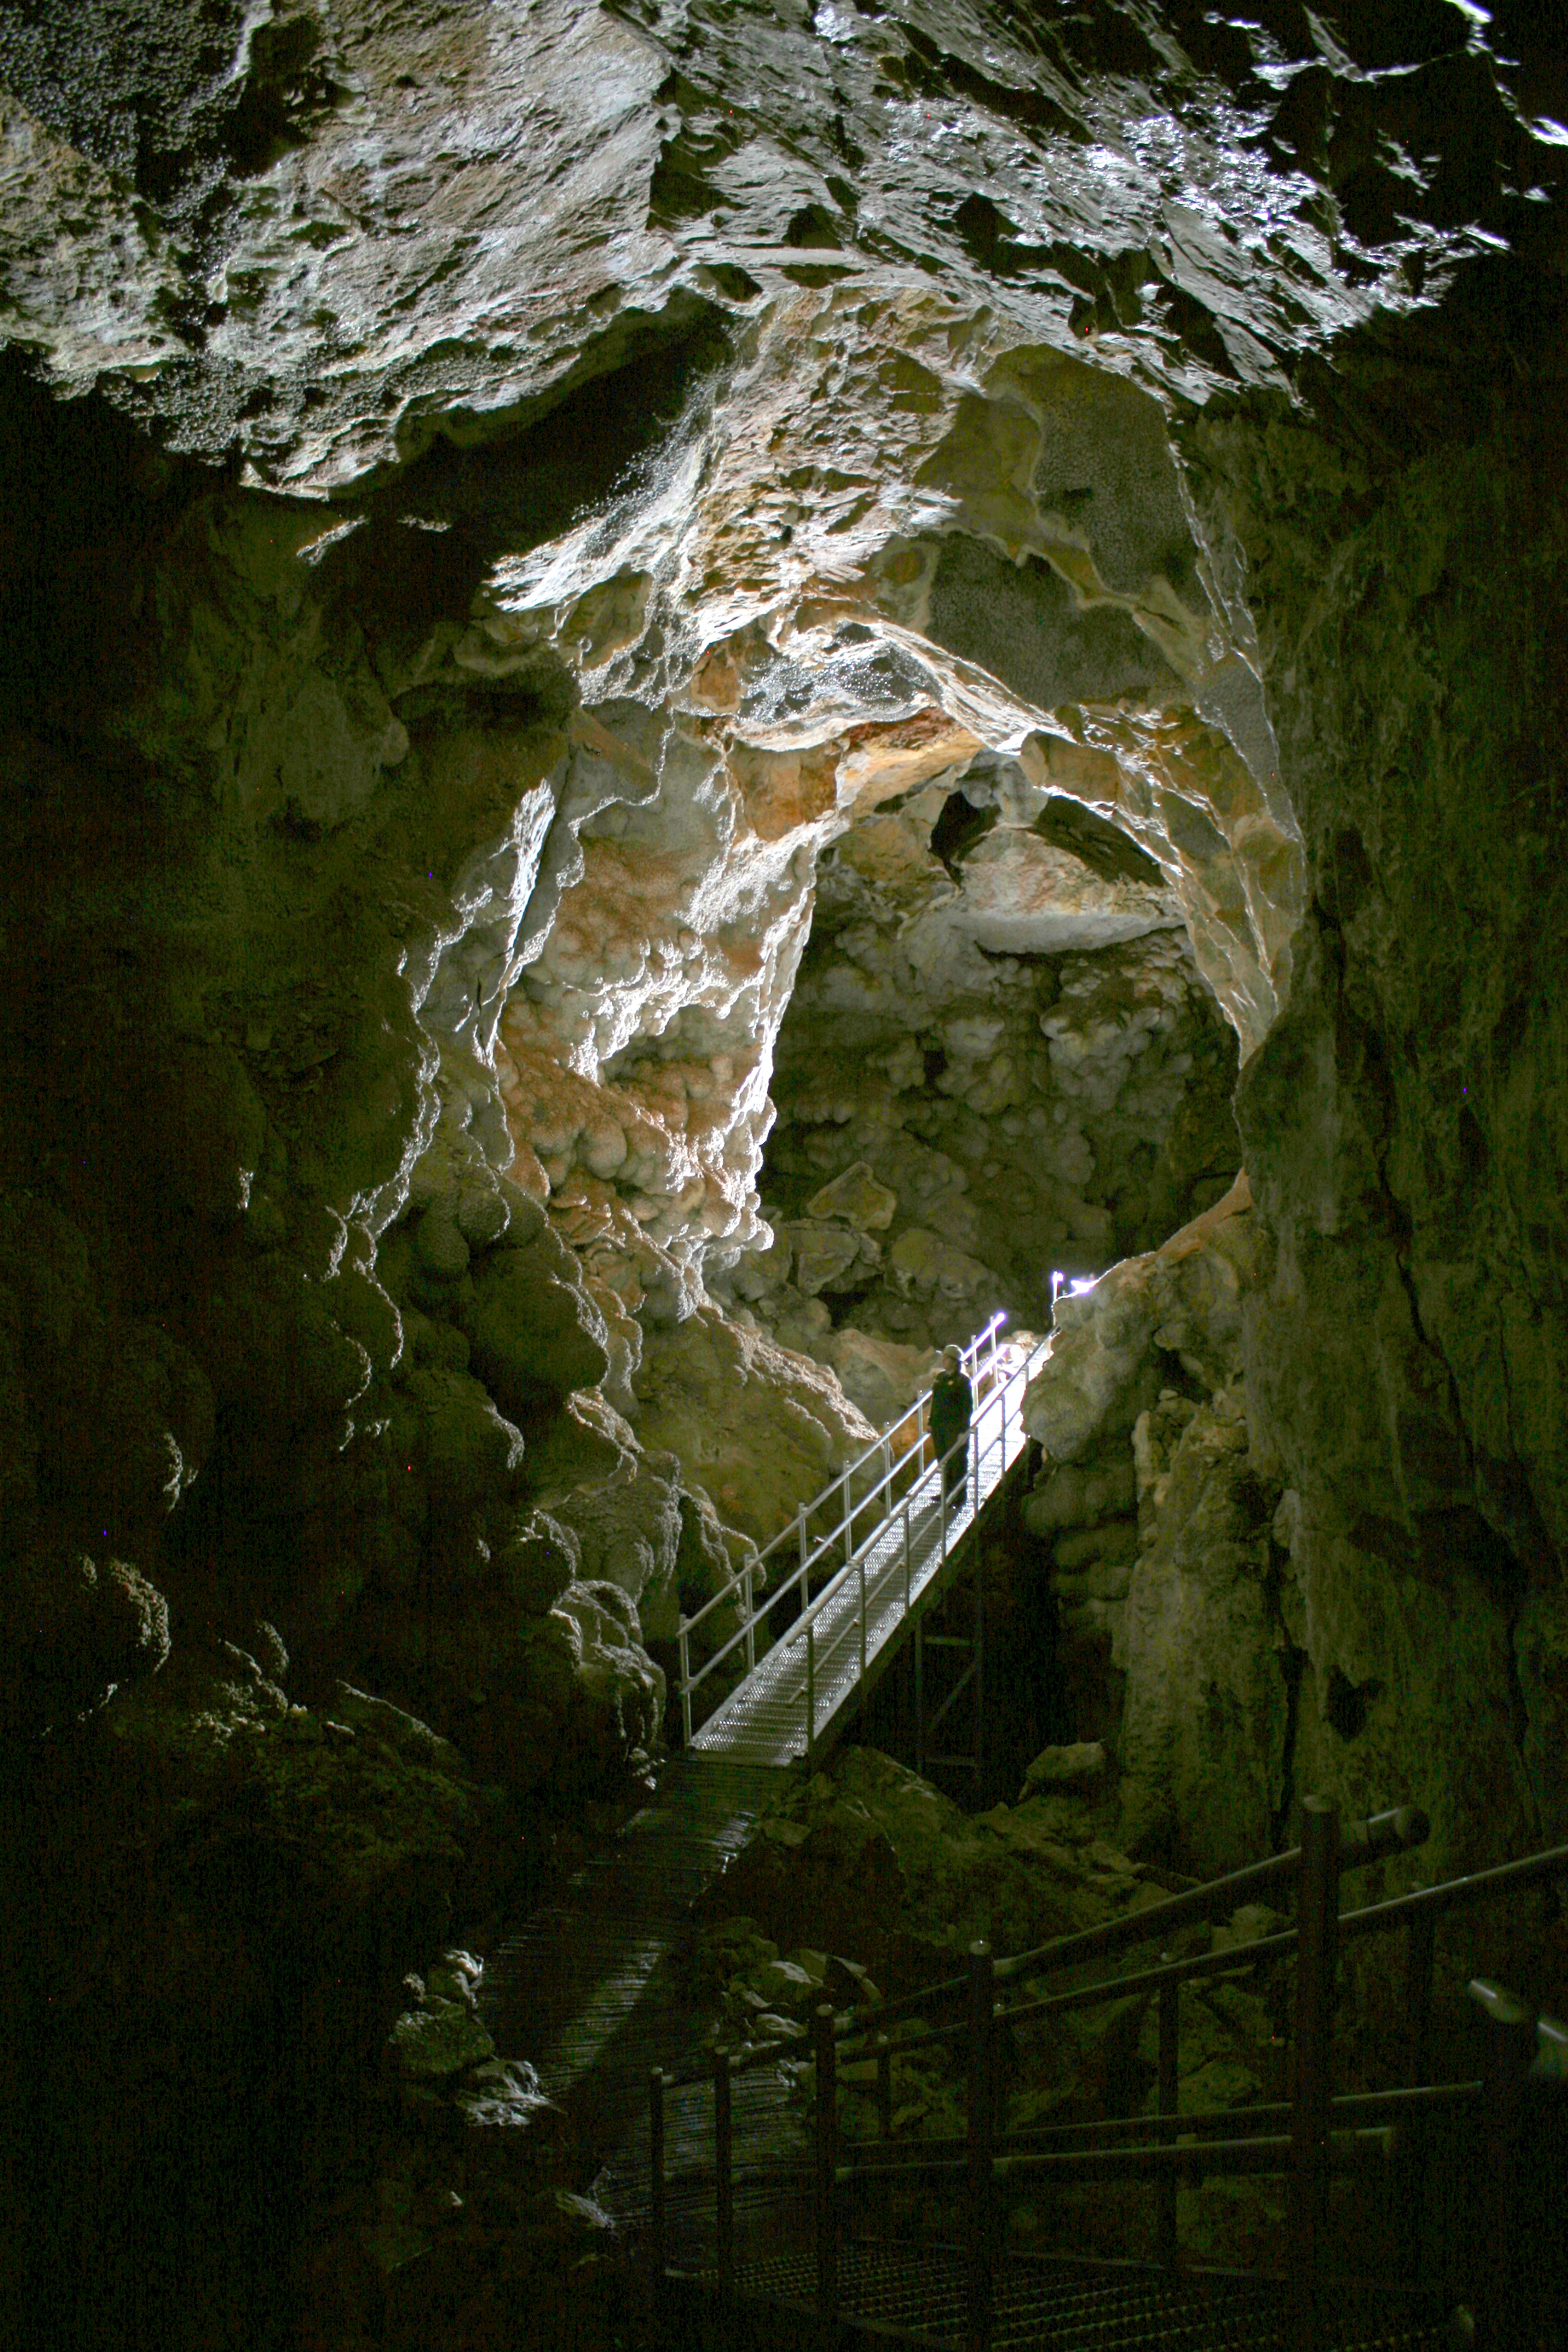 A park ranger is standing on a metal platform within a long passageway with a vaulted ceiling.